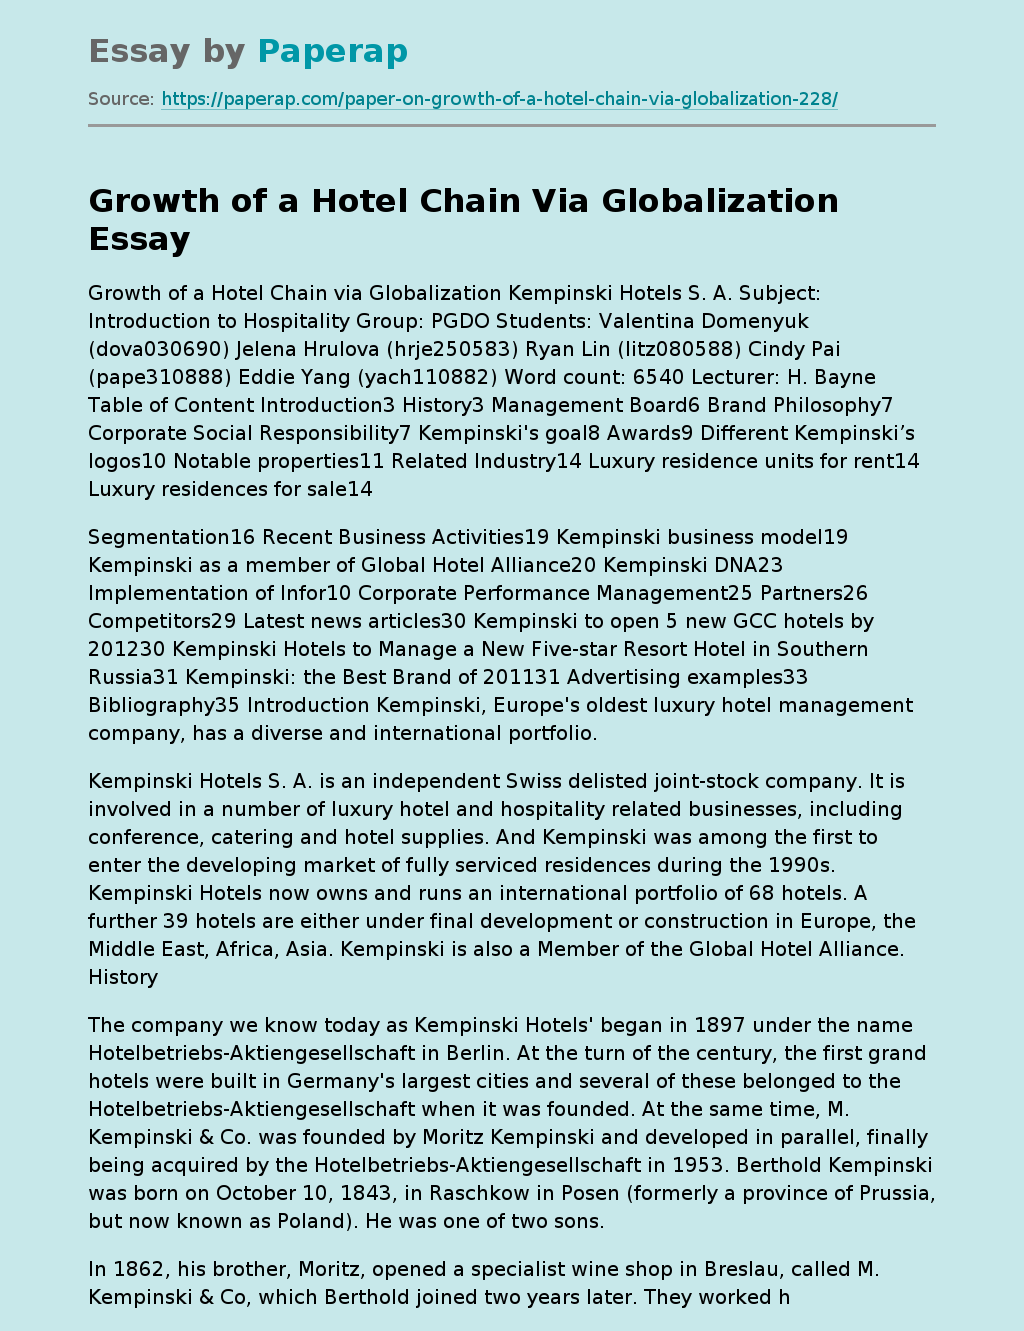 Growth of a Hotel Chain Via Globalization